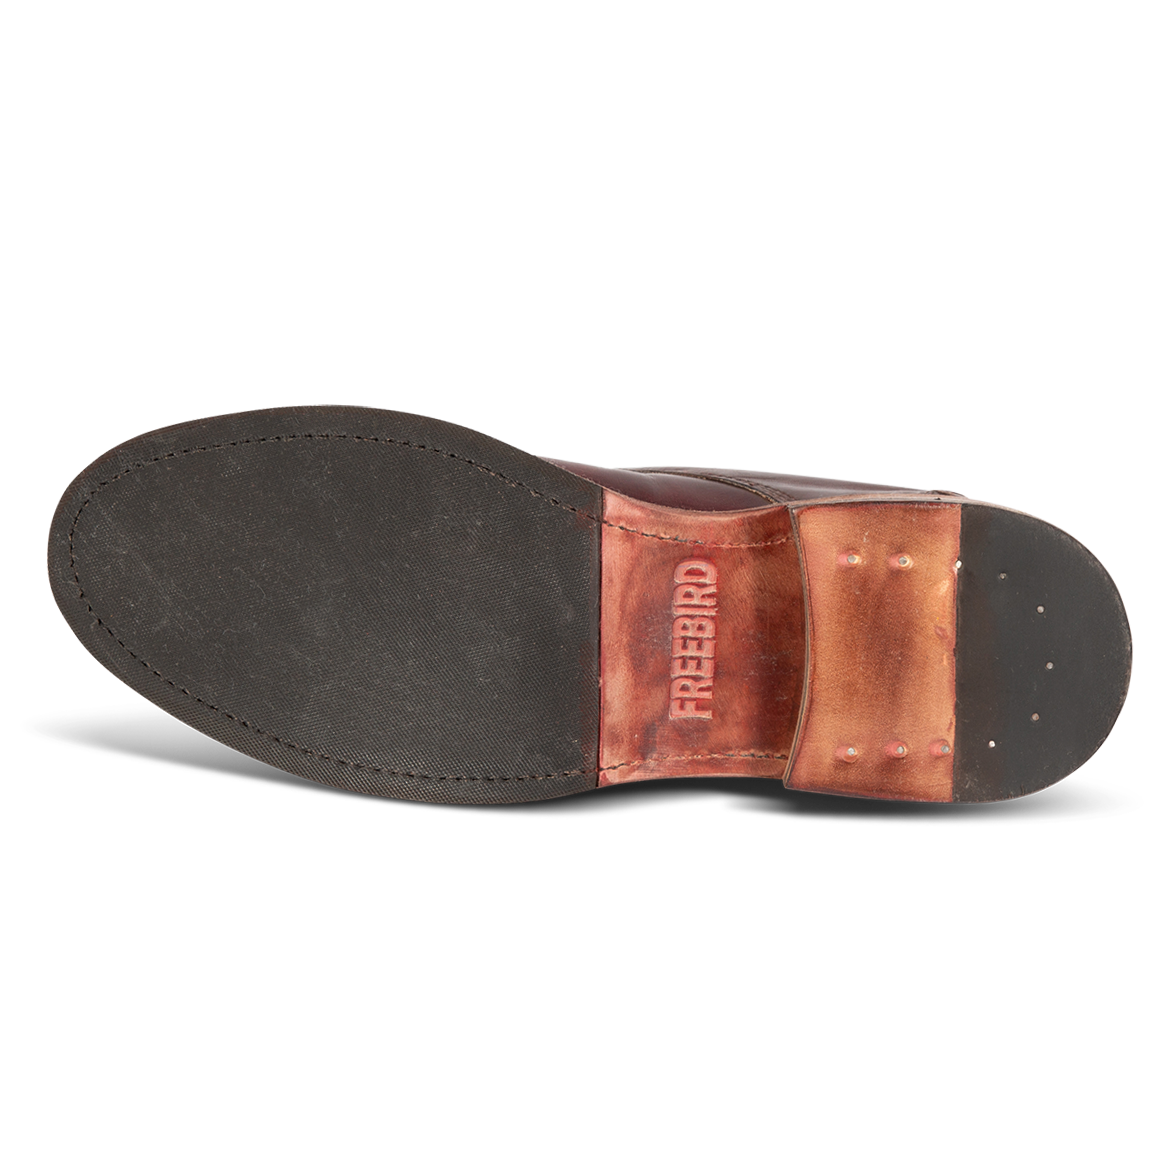 Rubber sole imprinted with FREEBIRD on men's McCoy wine shoe